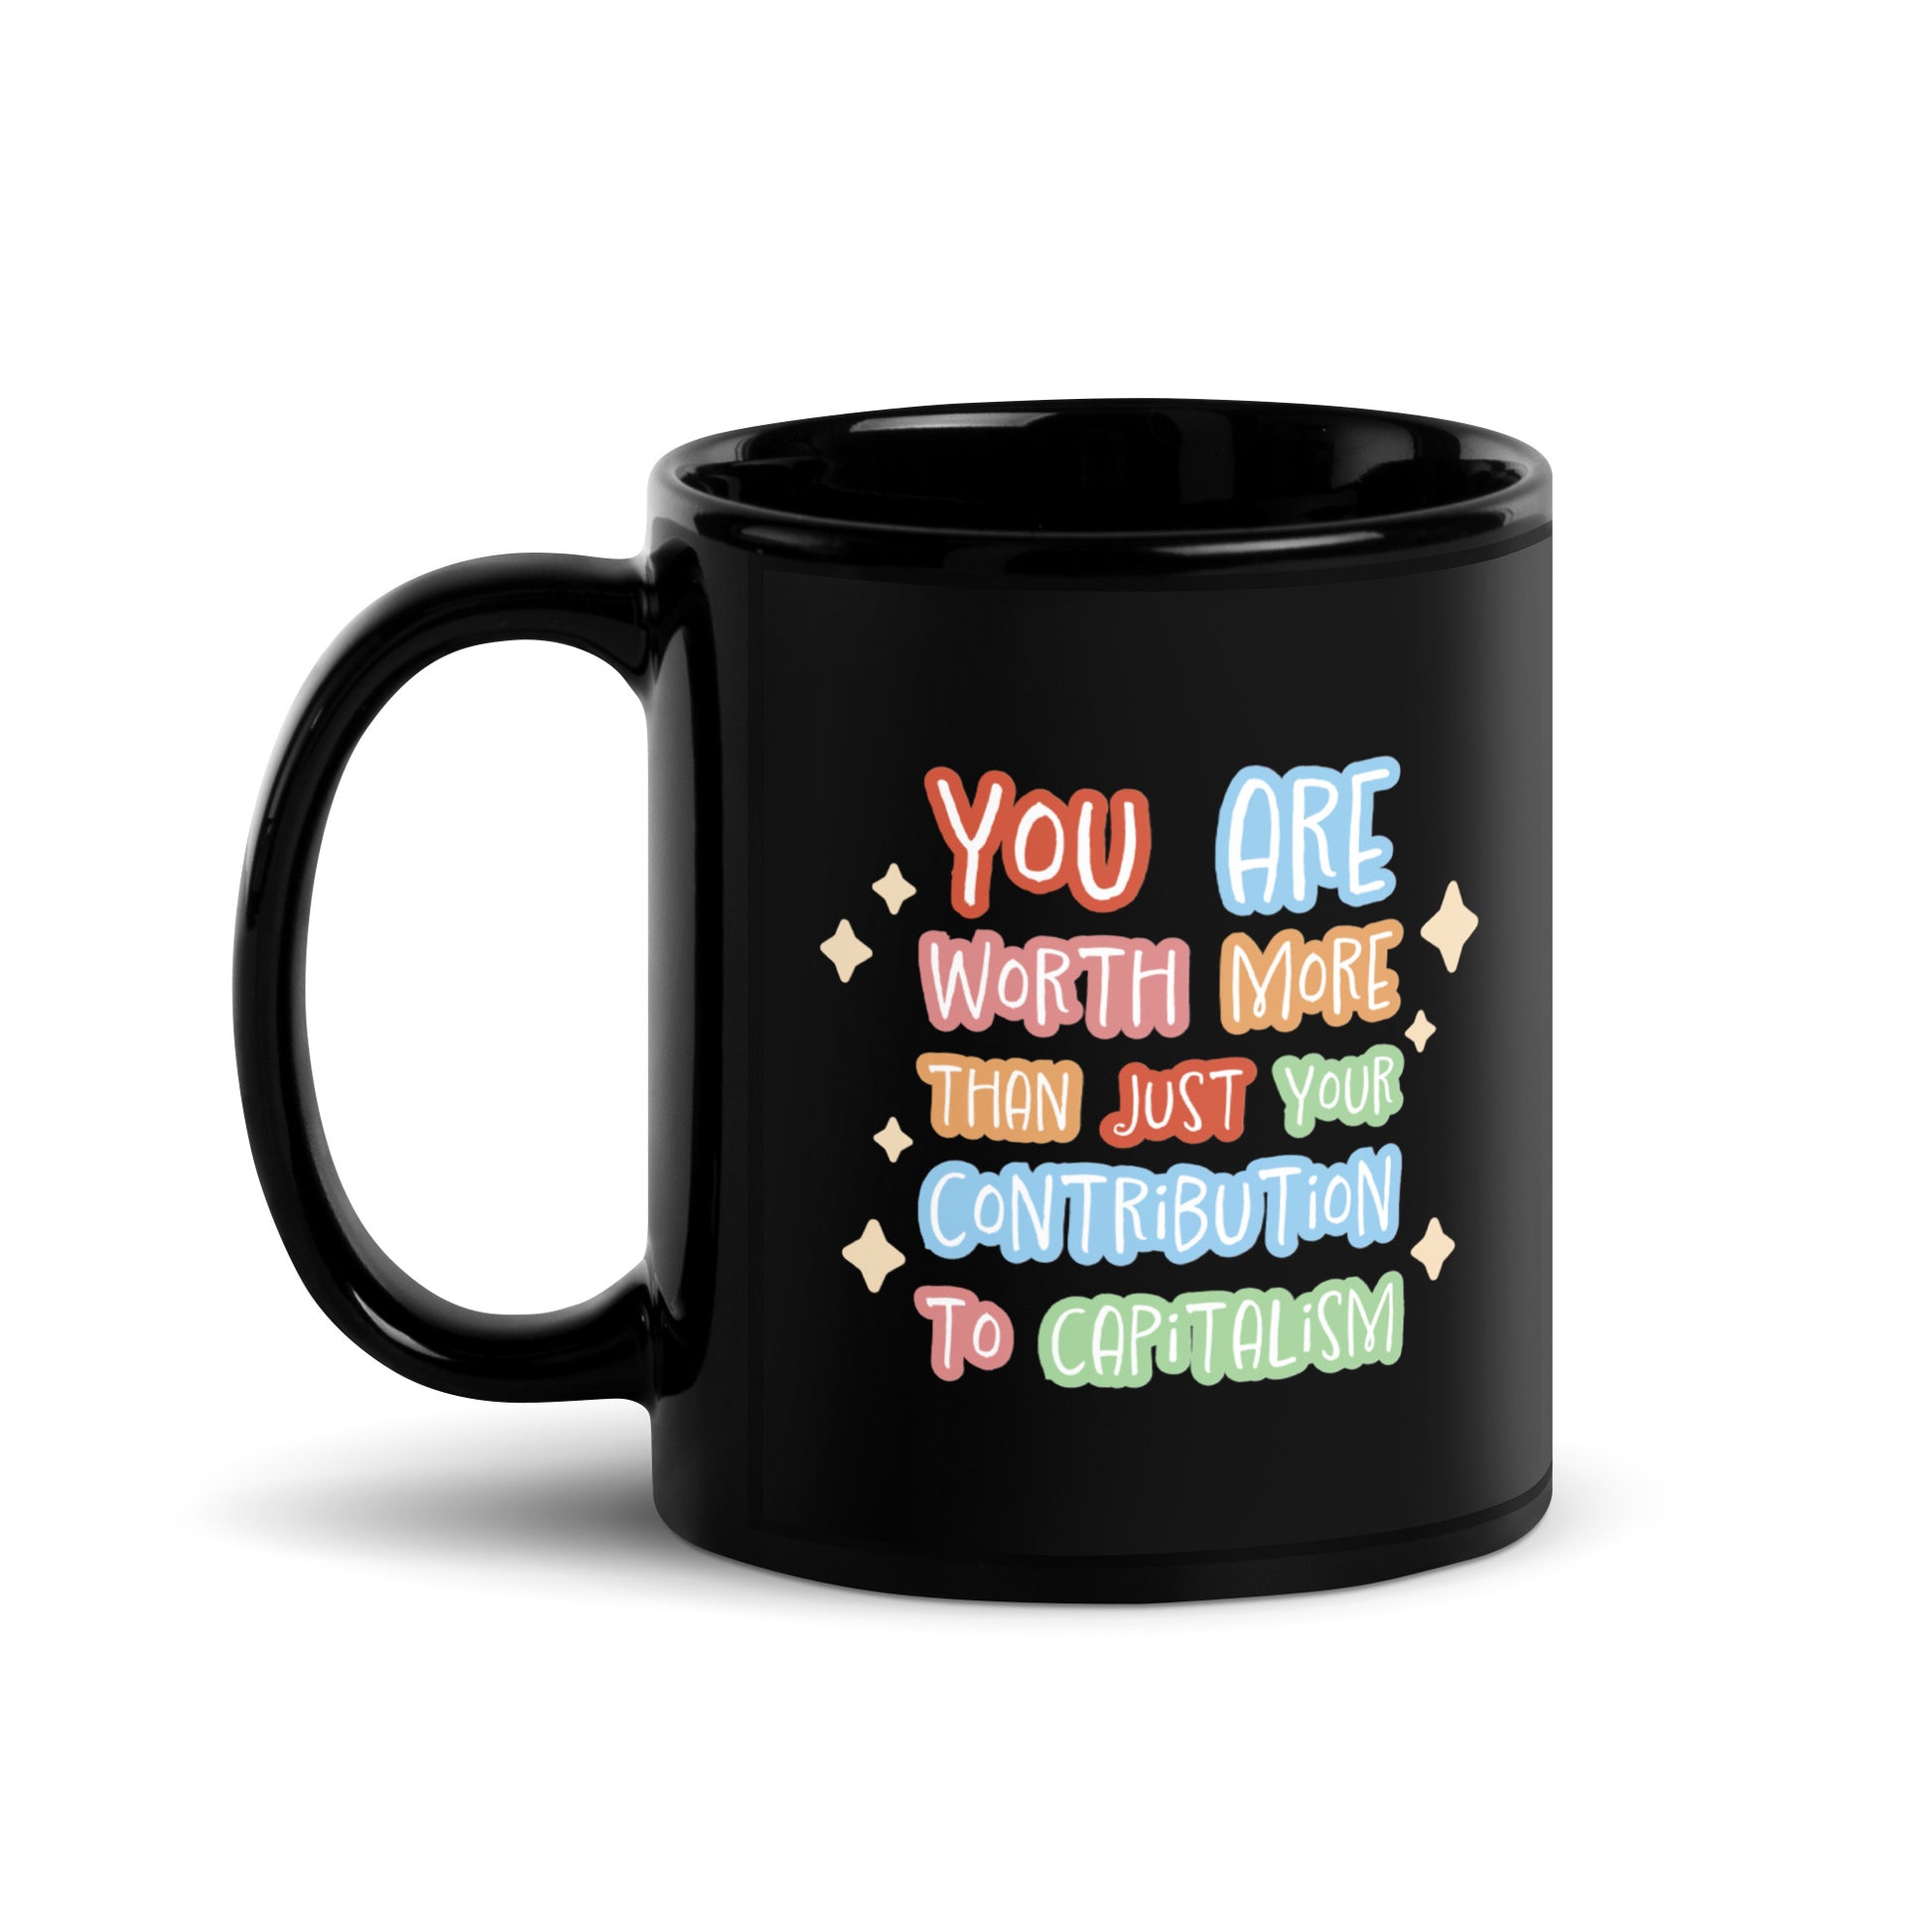 A black ceramic 11 ounce mug featuring colorful hand-written-style text that reads "You are worth more than just your contribution to capitalism". Sparkles surround the text on each side.